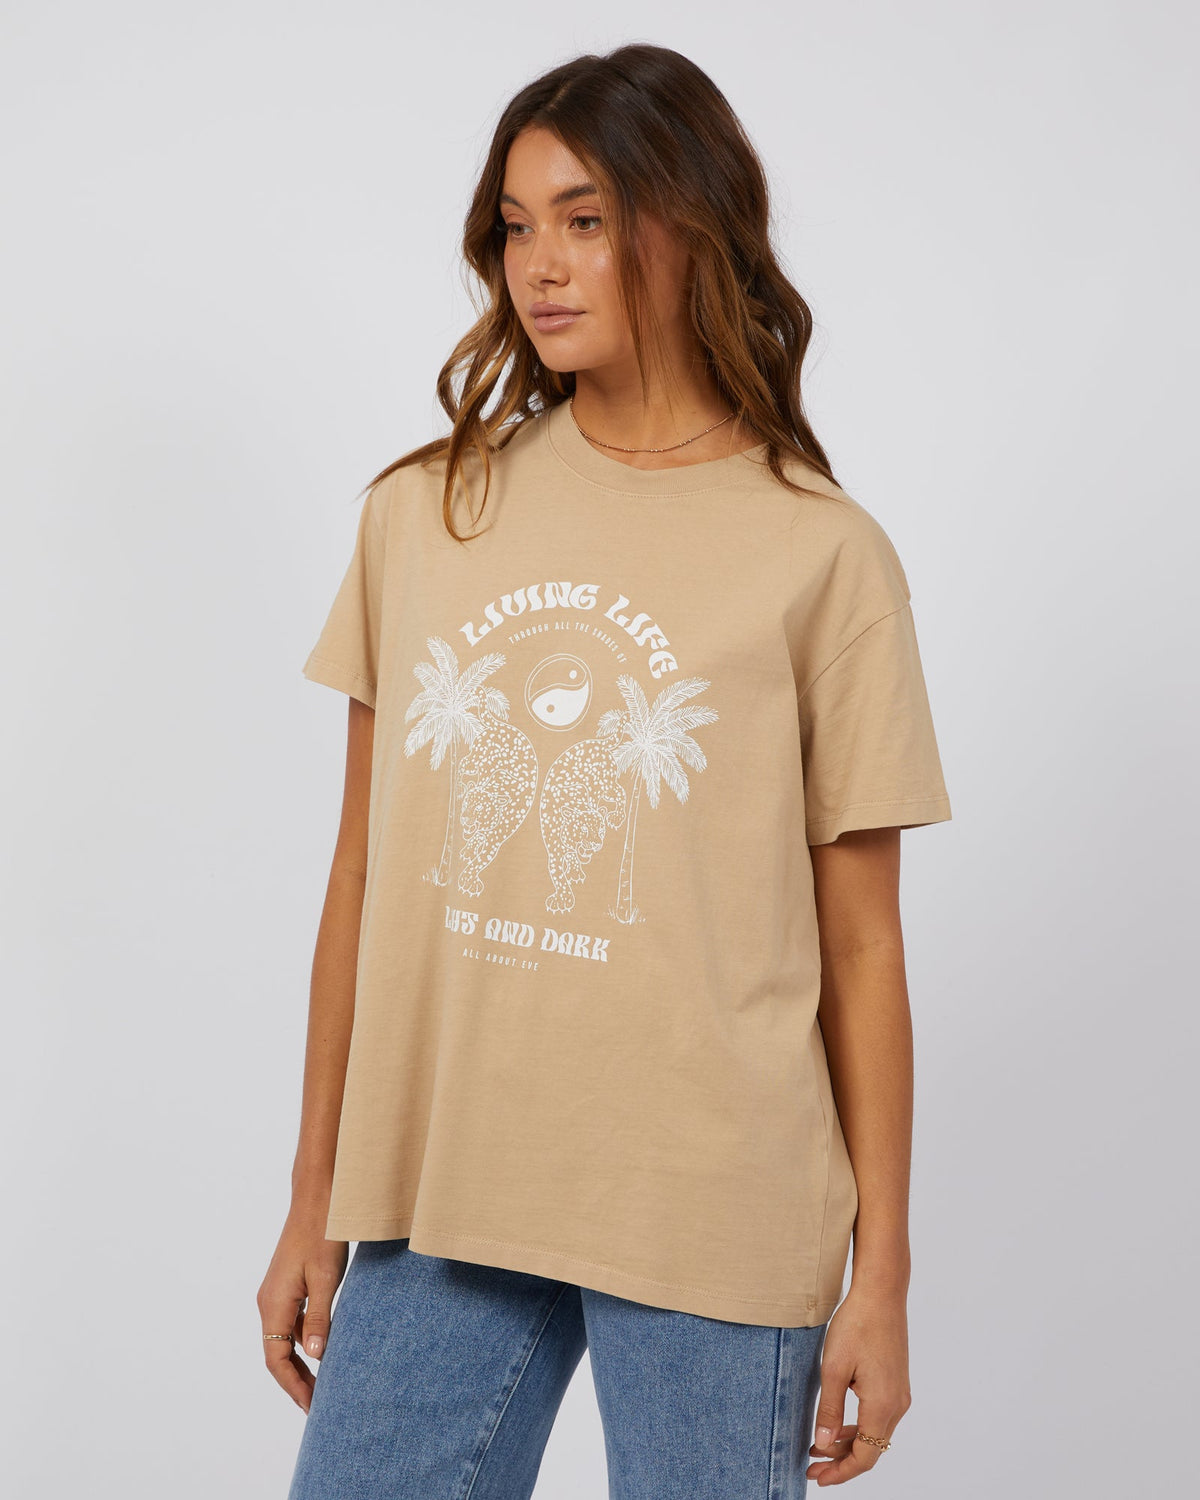 All About Eve-Living Life Standard Tee Oatmeal-Edge Clothing